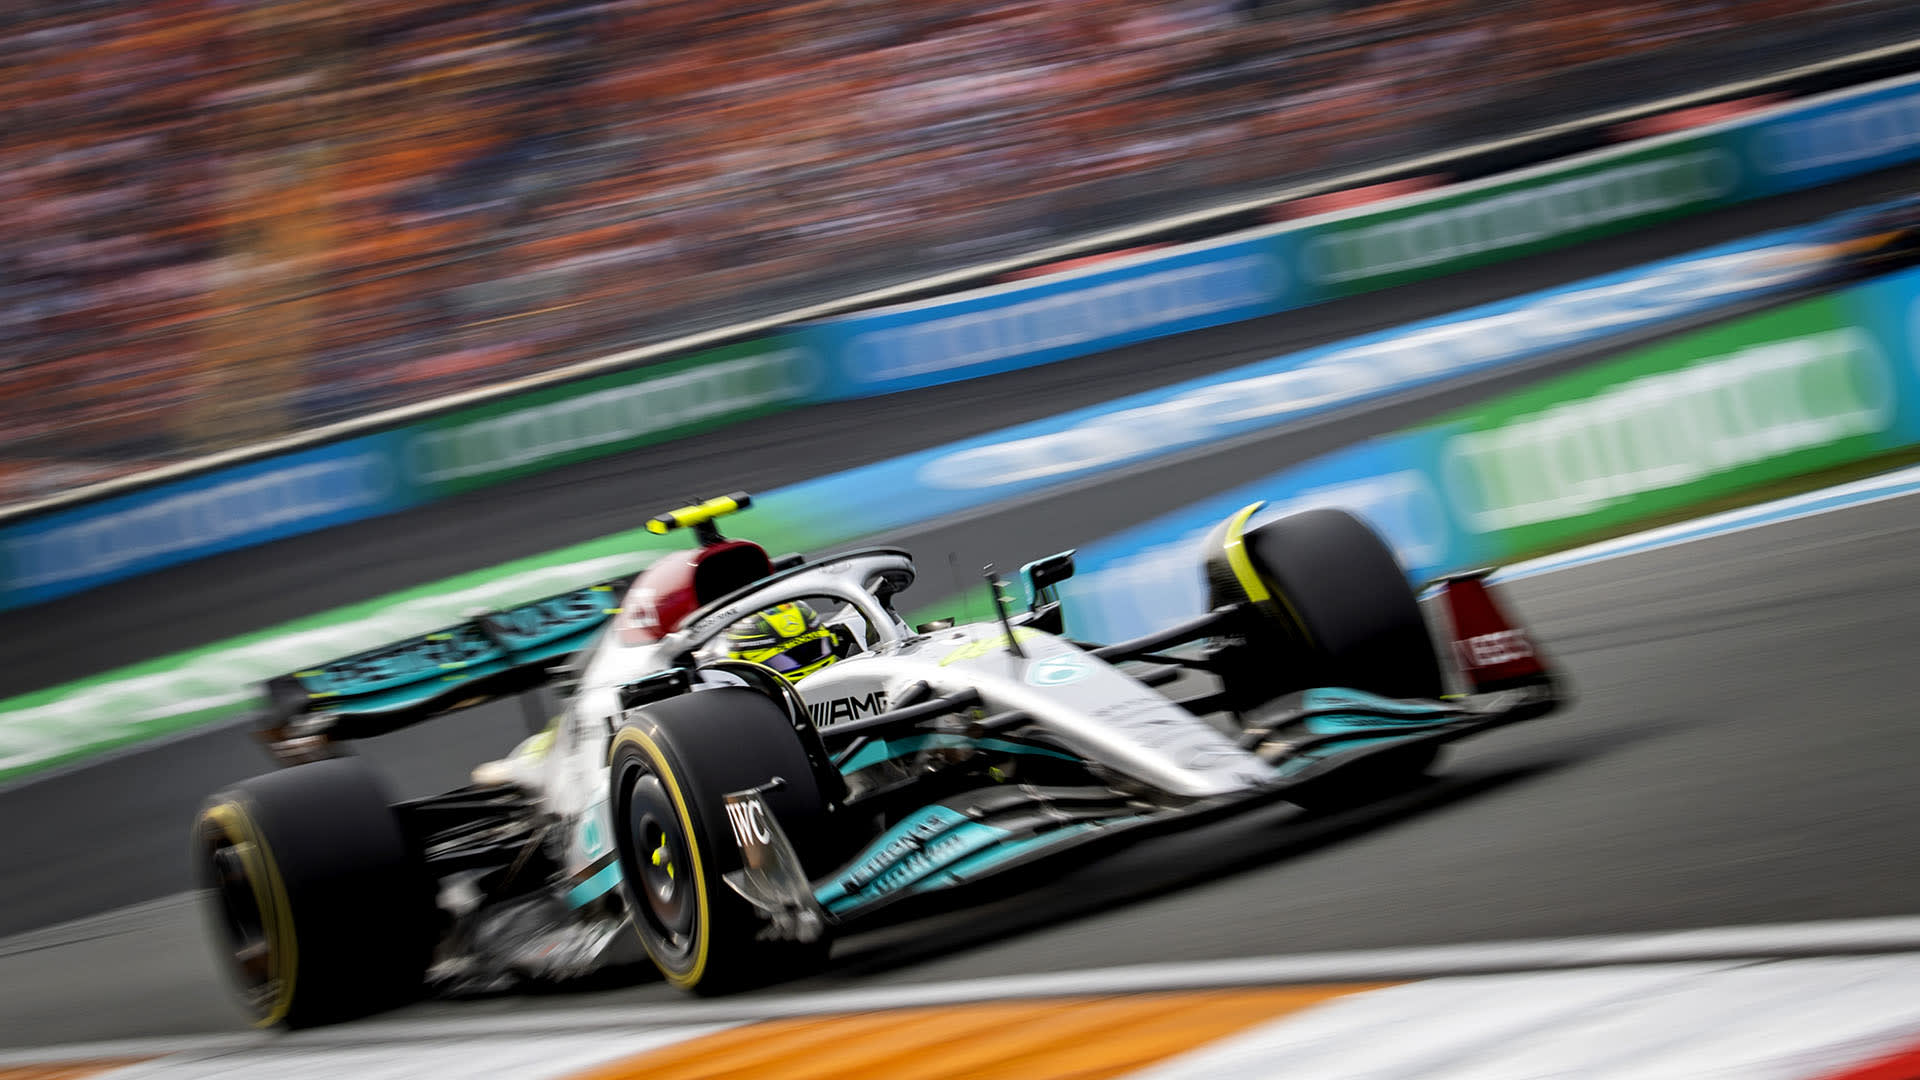 was hopeful were going to get a 1-2' says Hamilton, as he apologises for angry Dutch GP radio outbursts | Formula 1®